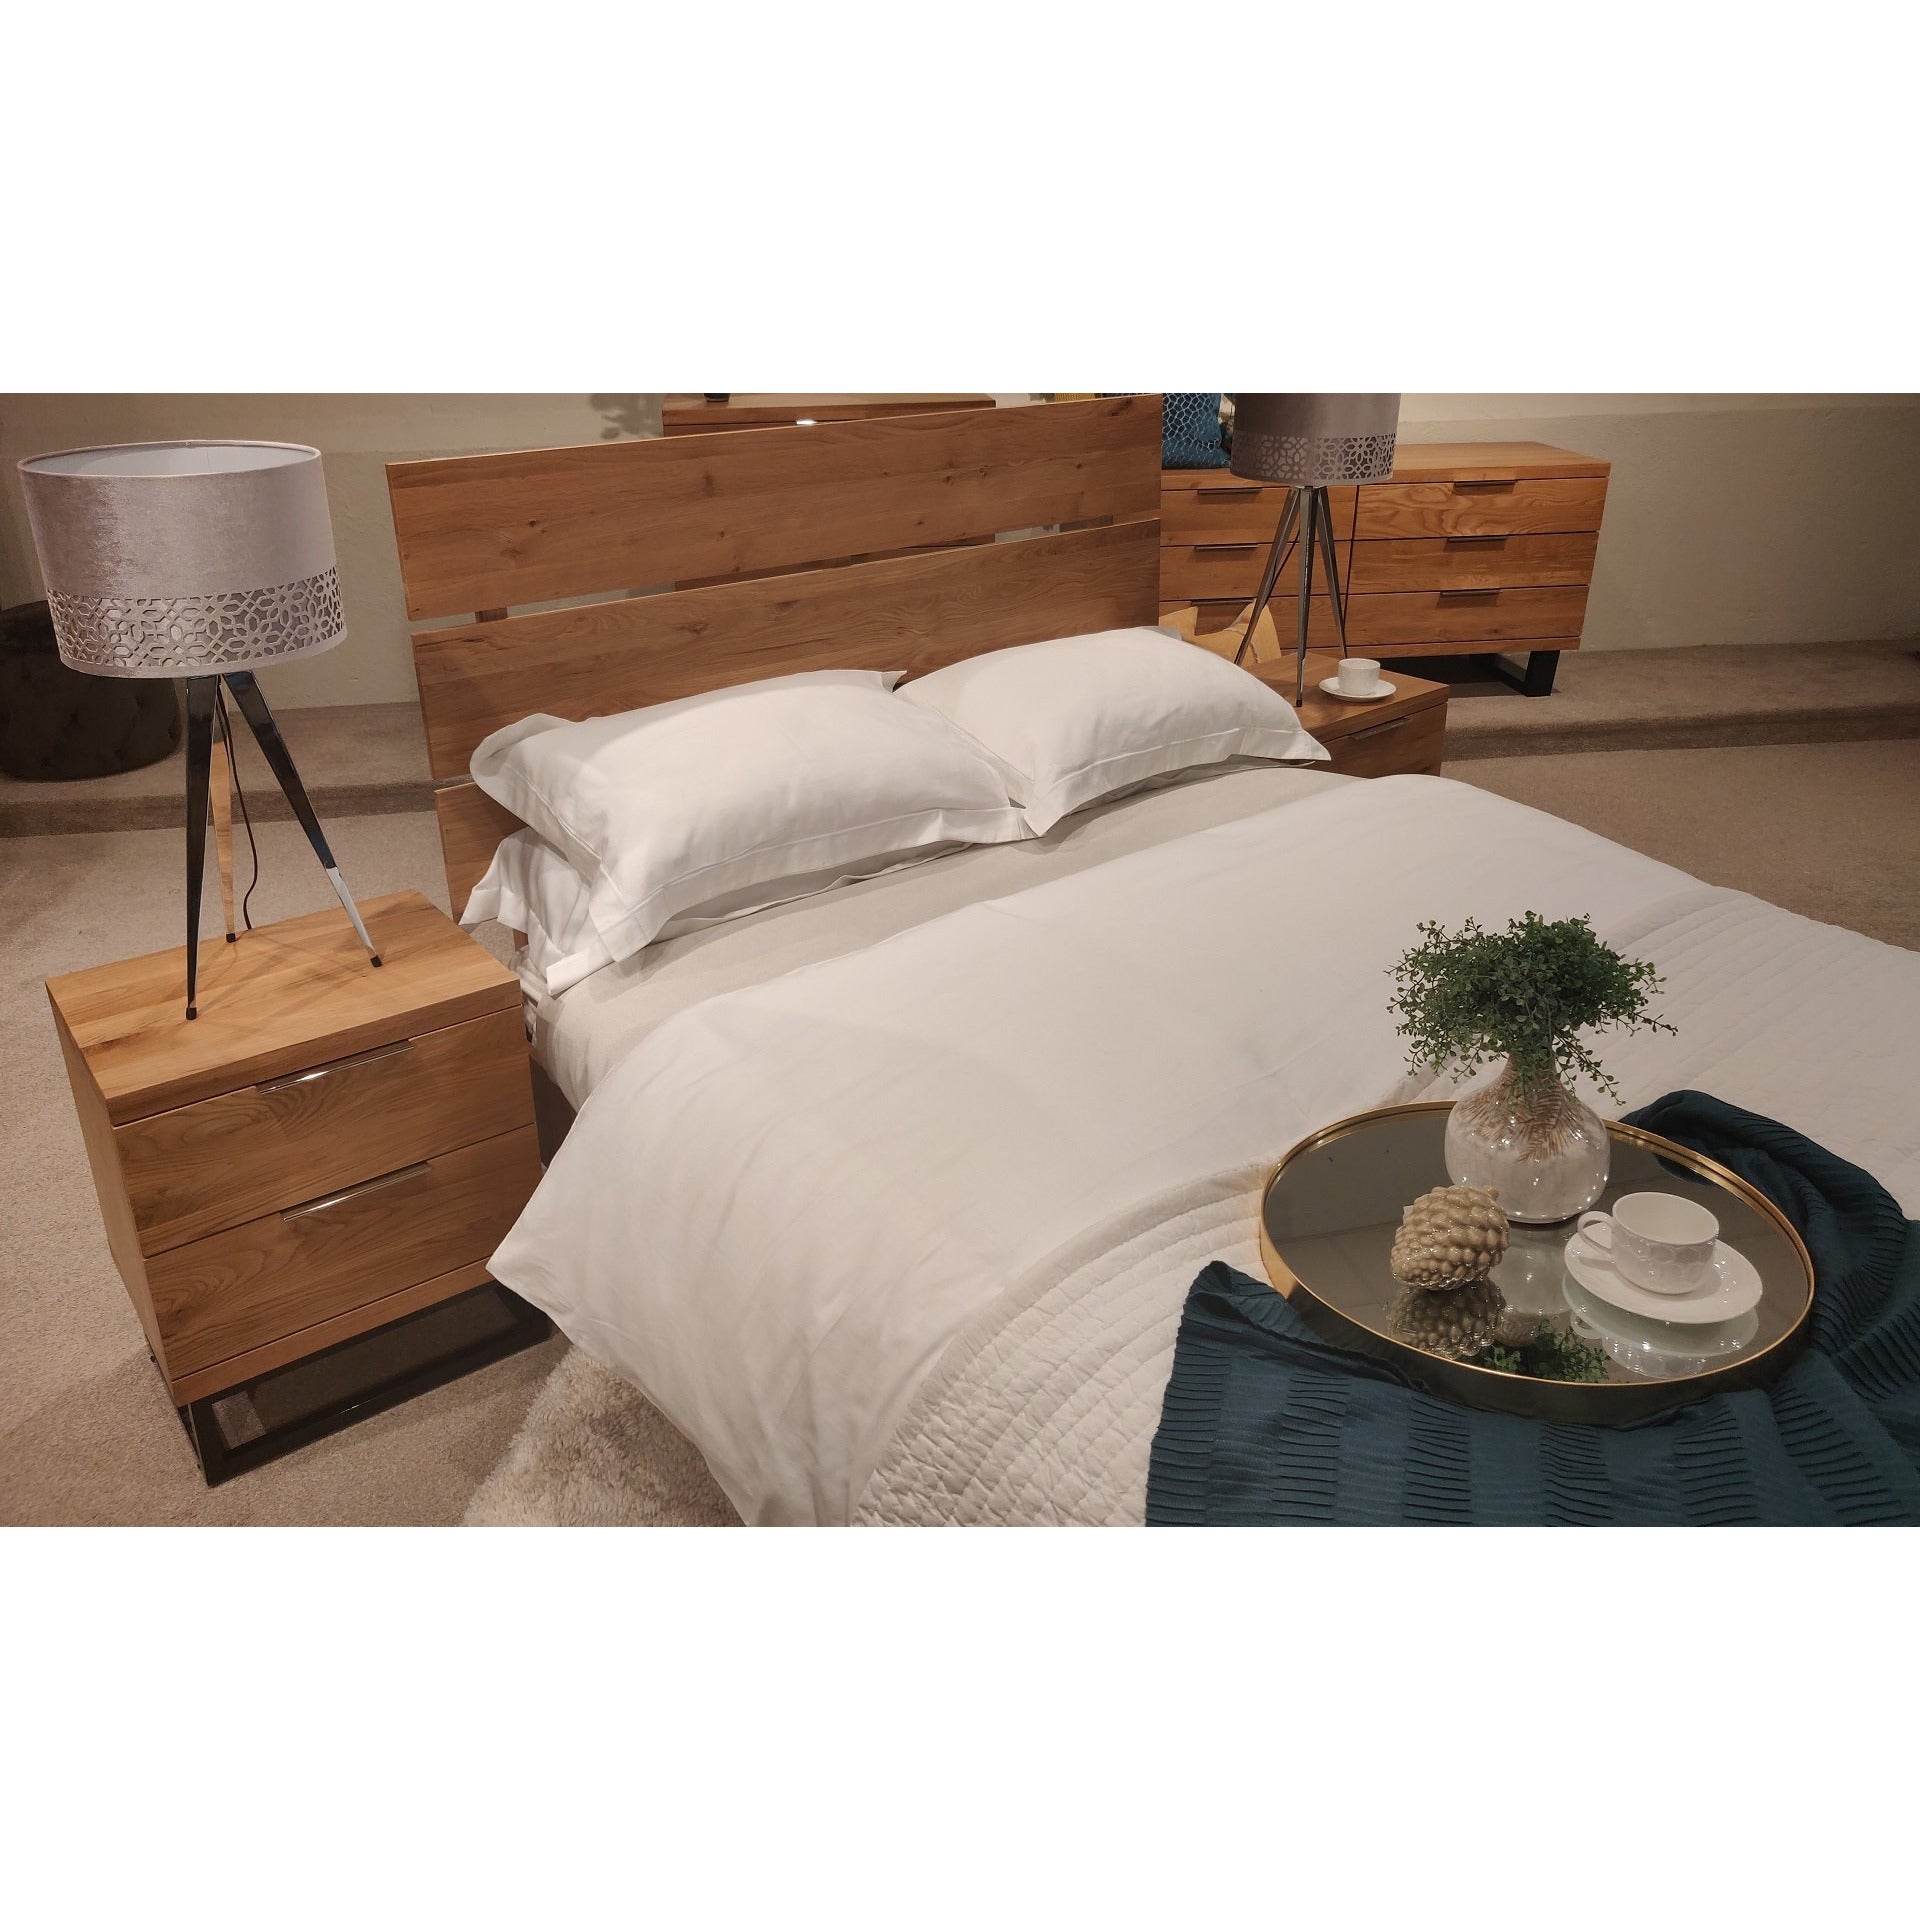 Kala 5ft King Bed Frame from Upstairs Downstairs Furniture in Lisburn, Monaghan and Enniskillen